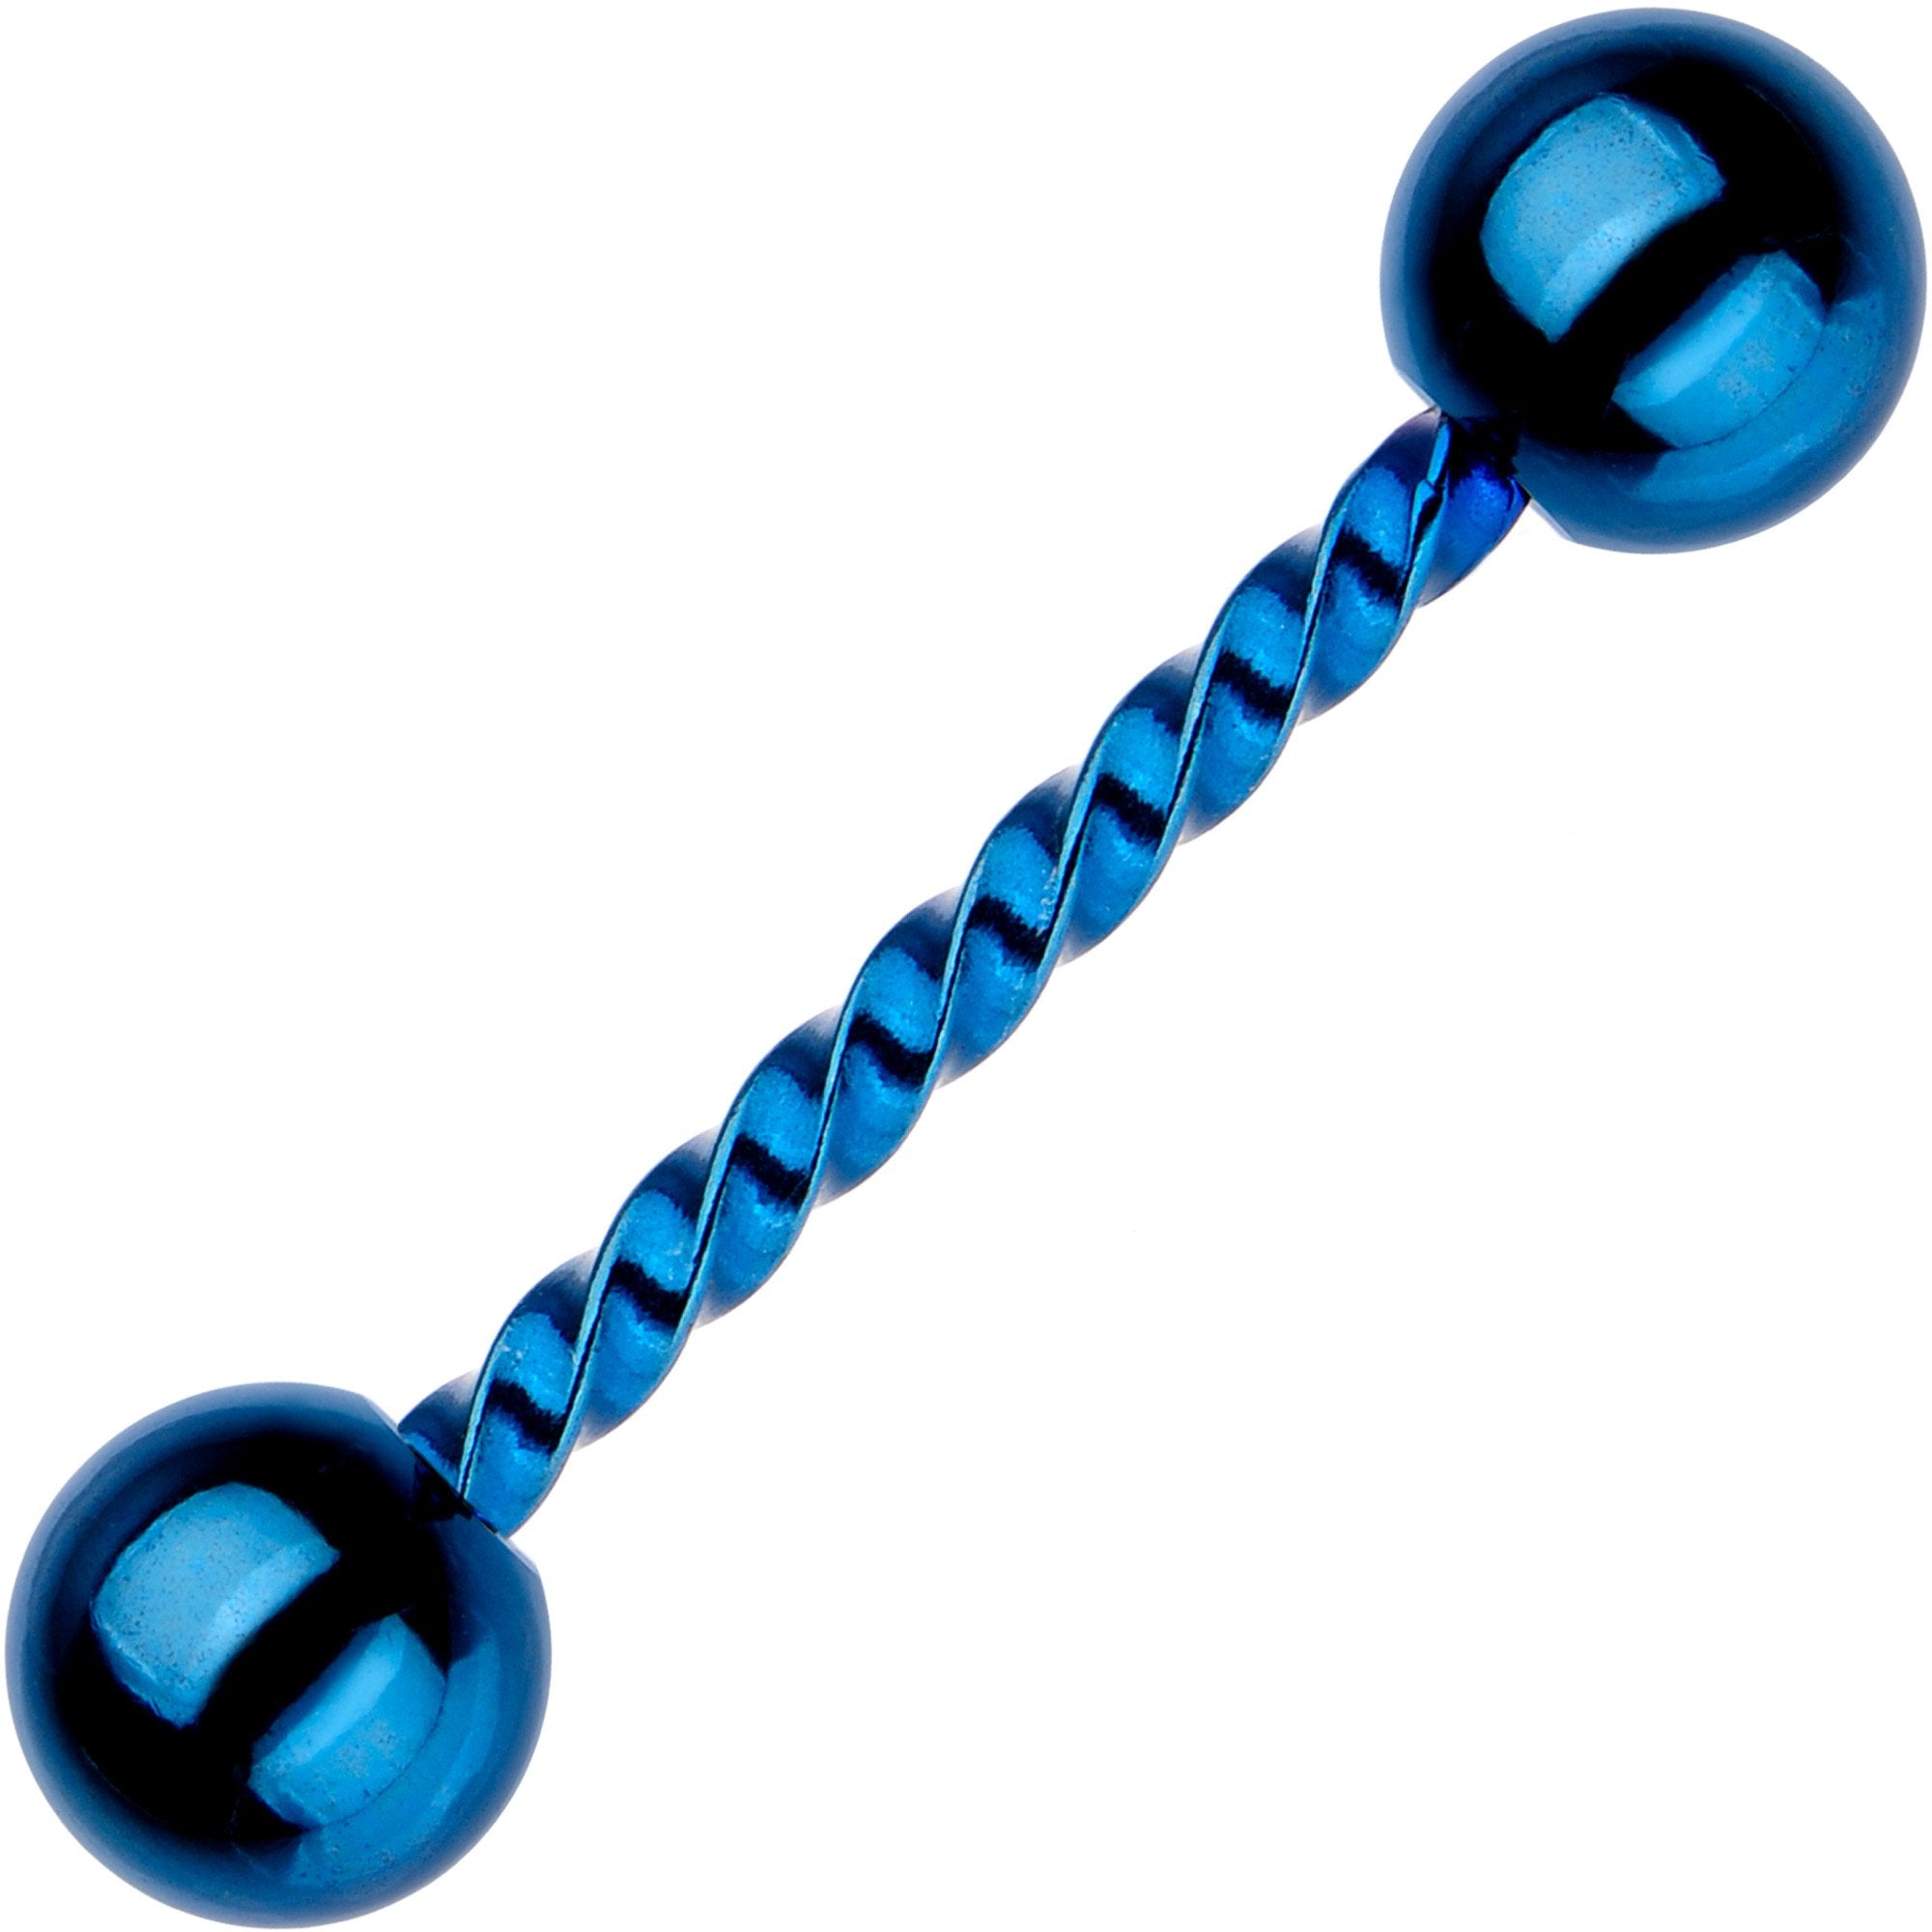 14 Gauge 5/8 Blue IP Seriously Twisted Barbell Tongue Ring